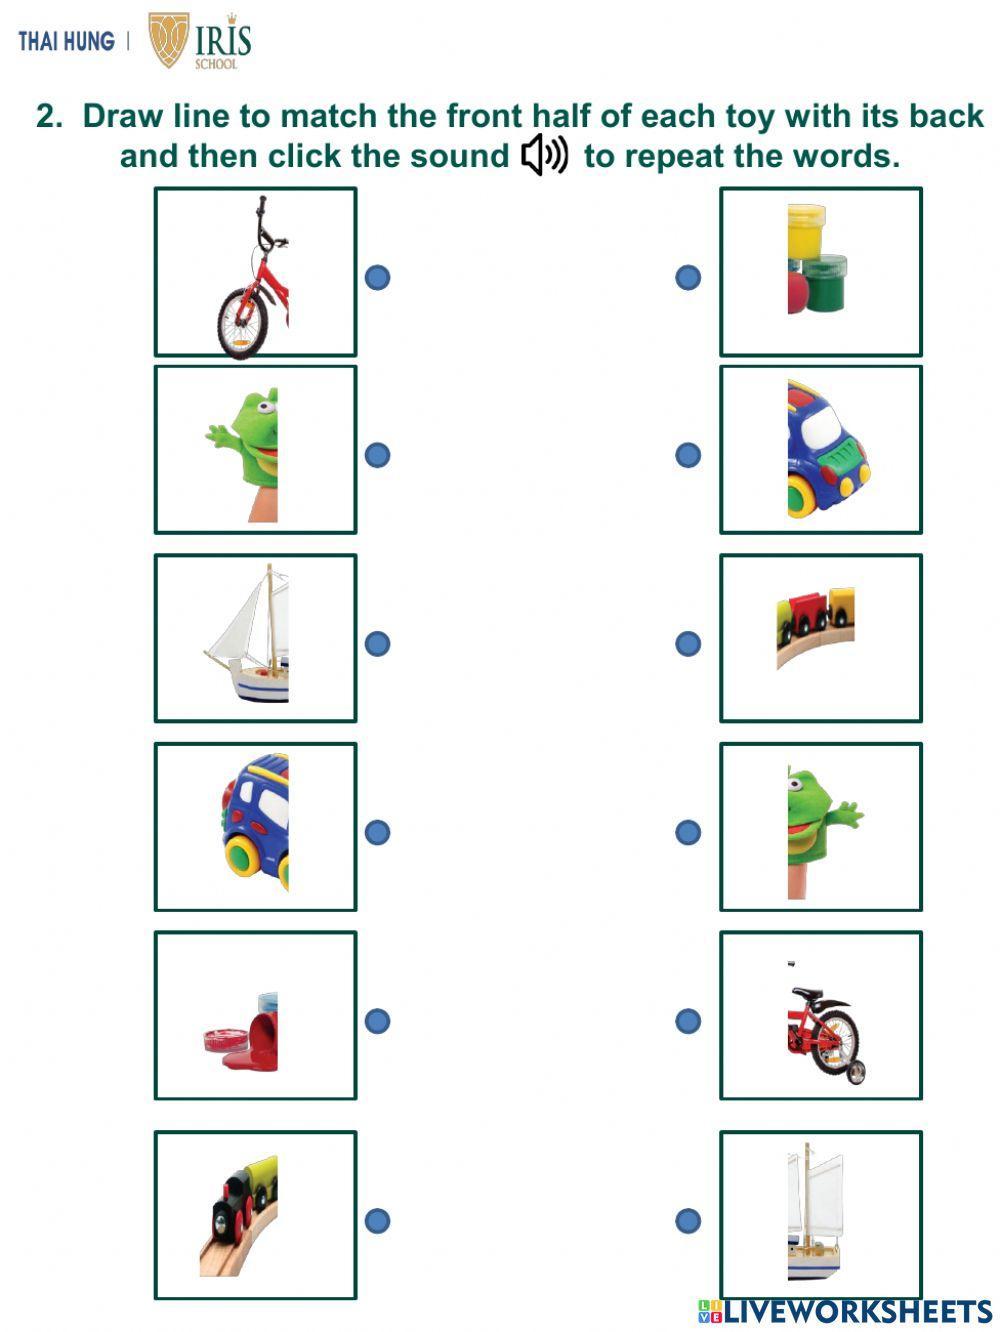 Rainbow-Worksheet about Toys for Kids